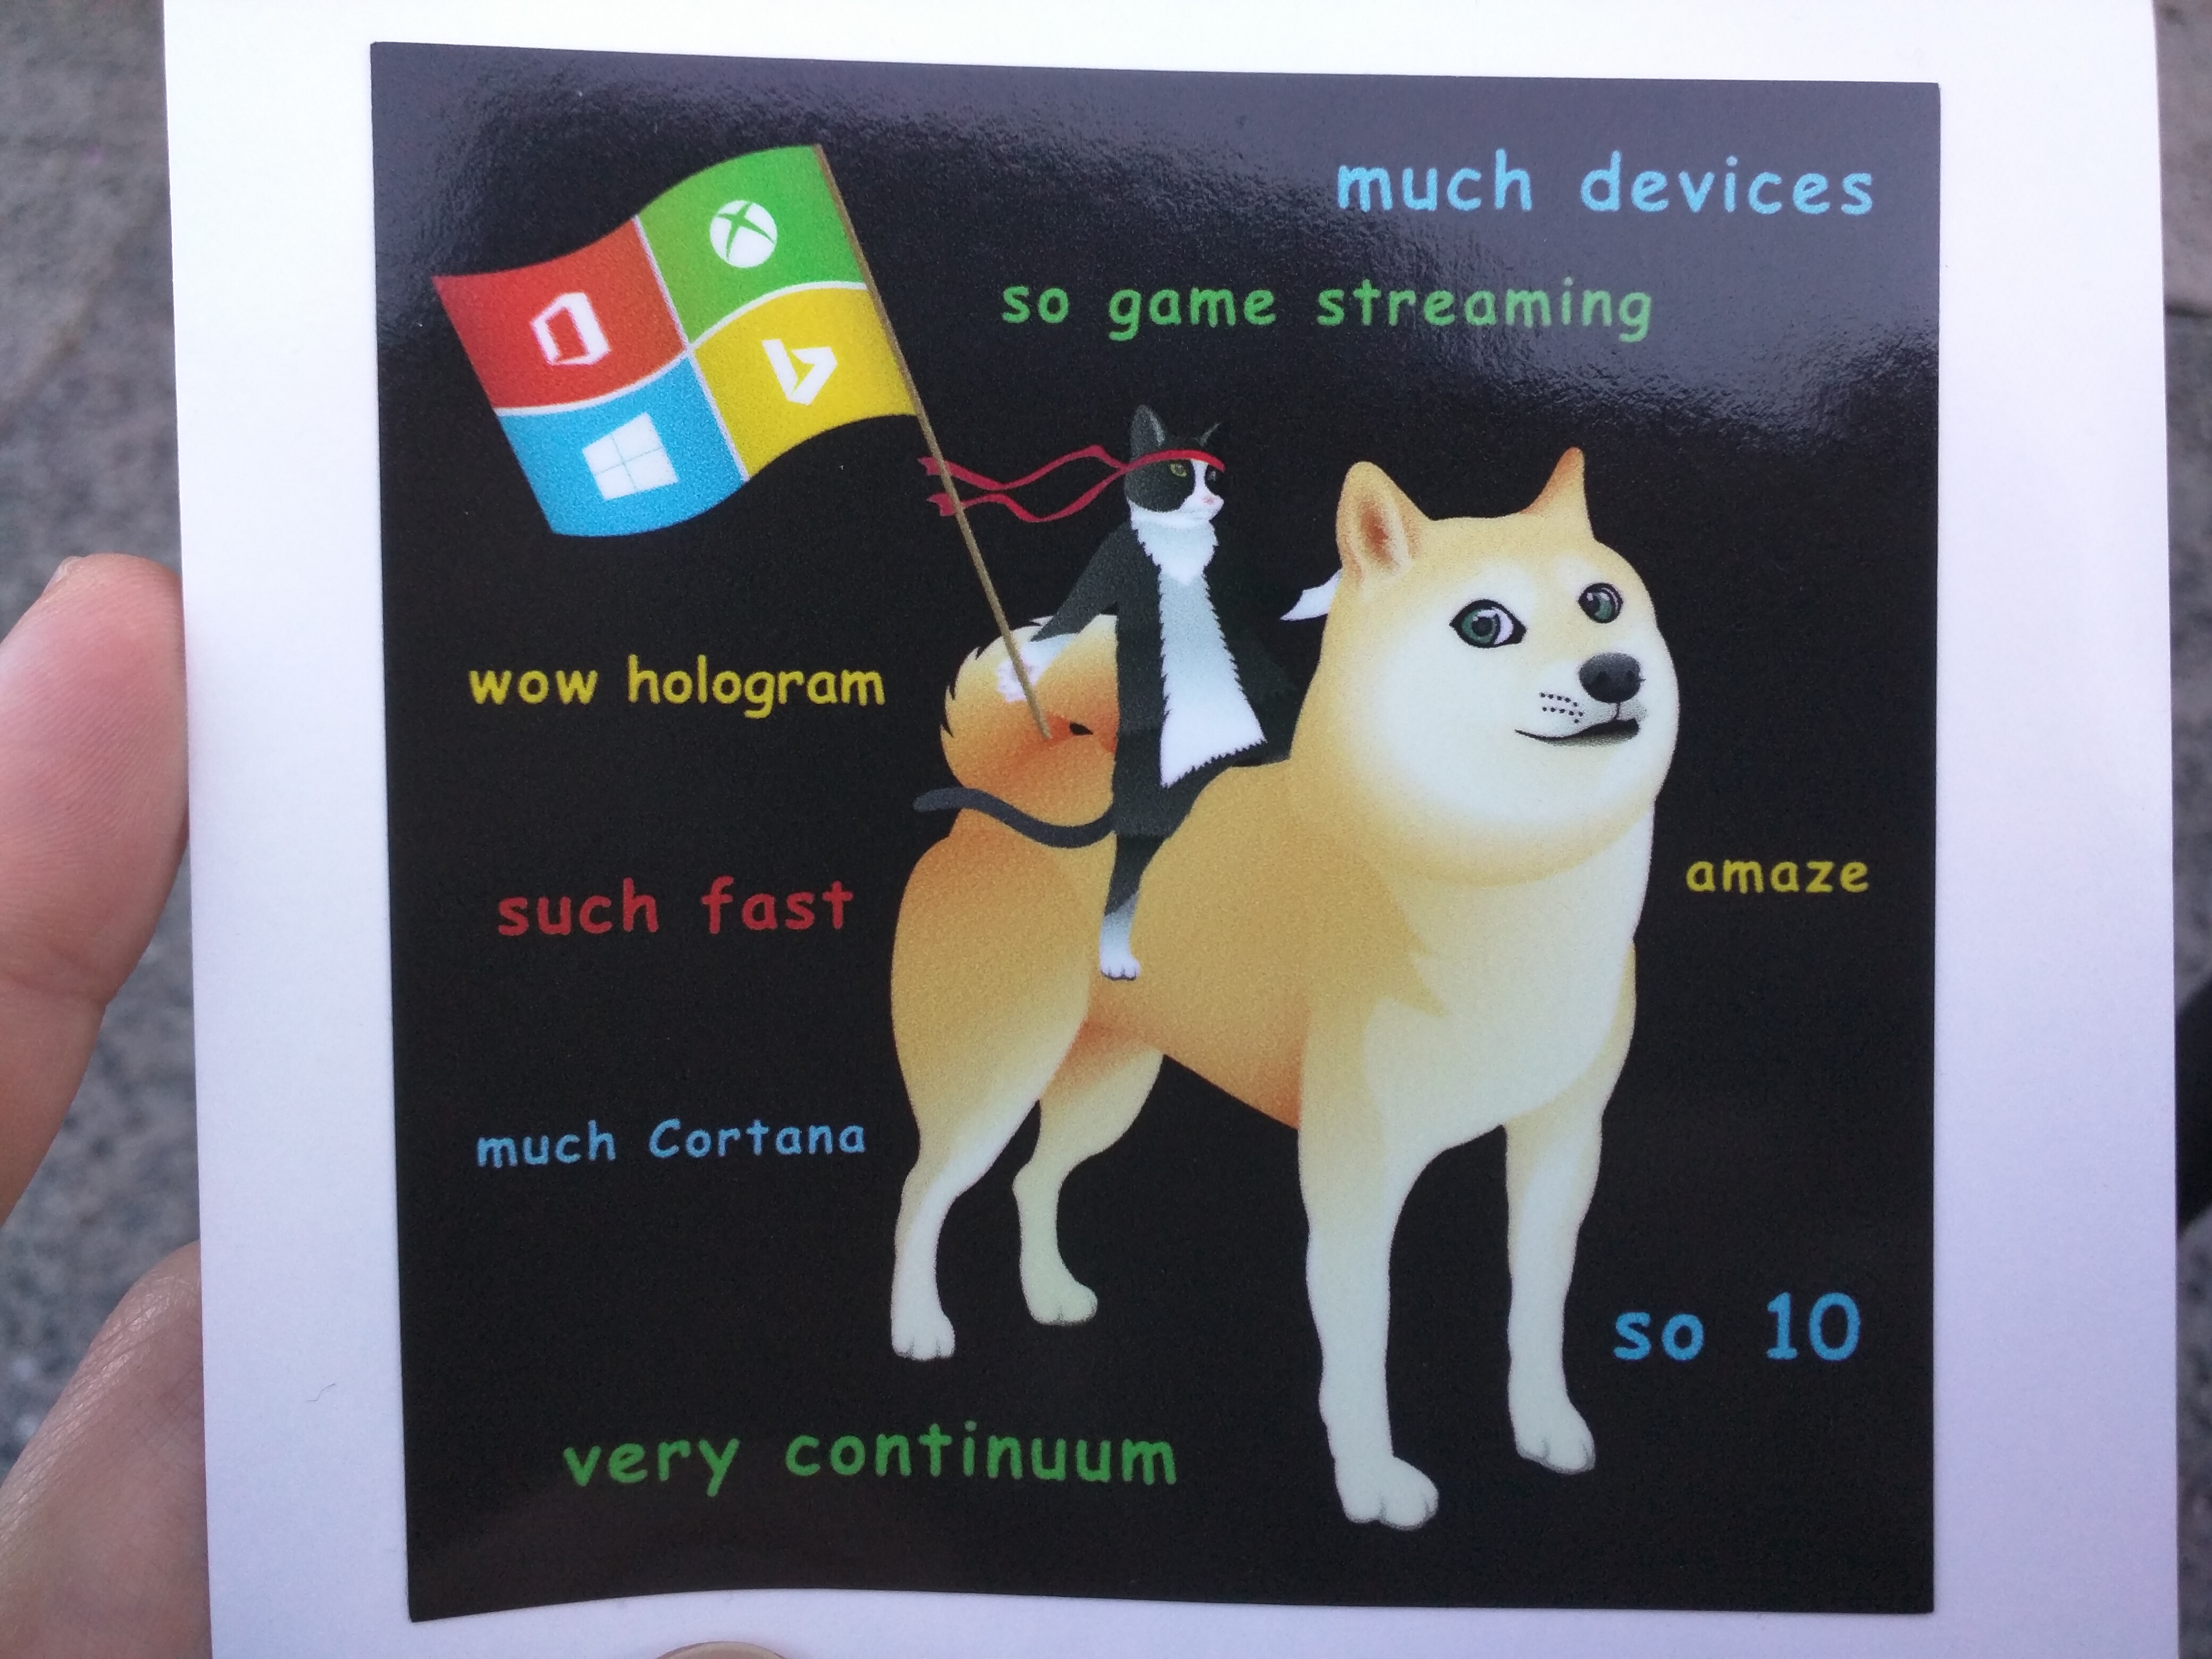 Microsoft handing out shibe doge meme fliers at their Windows 10 Conference